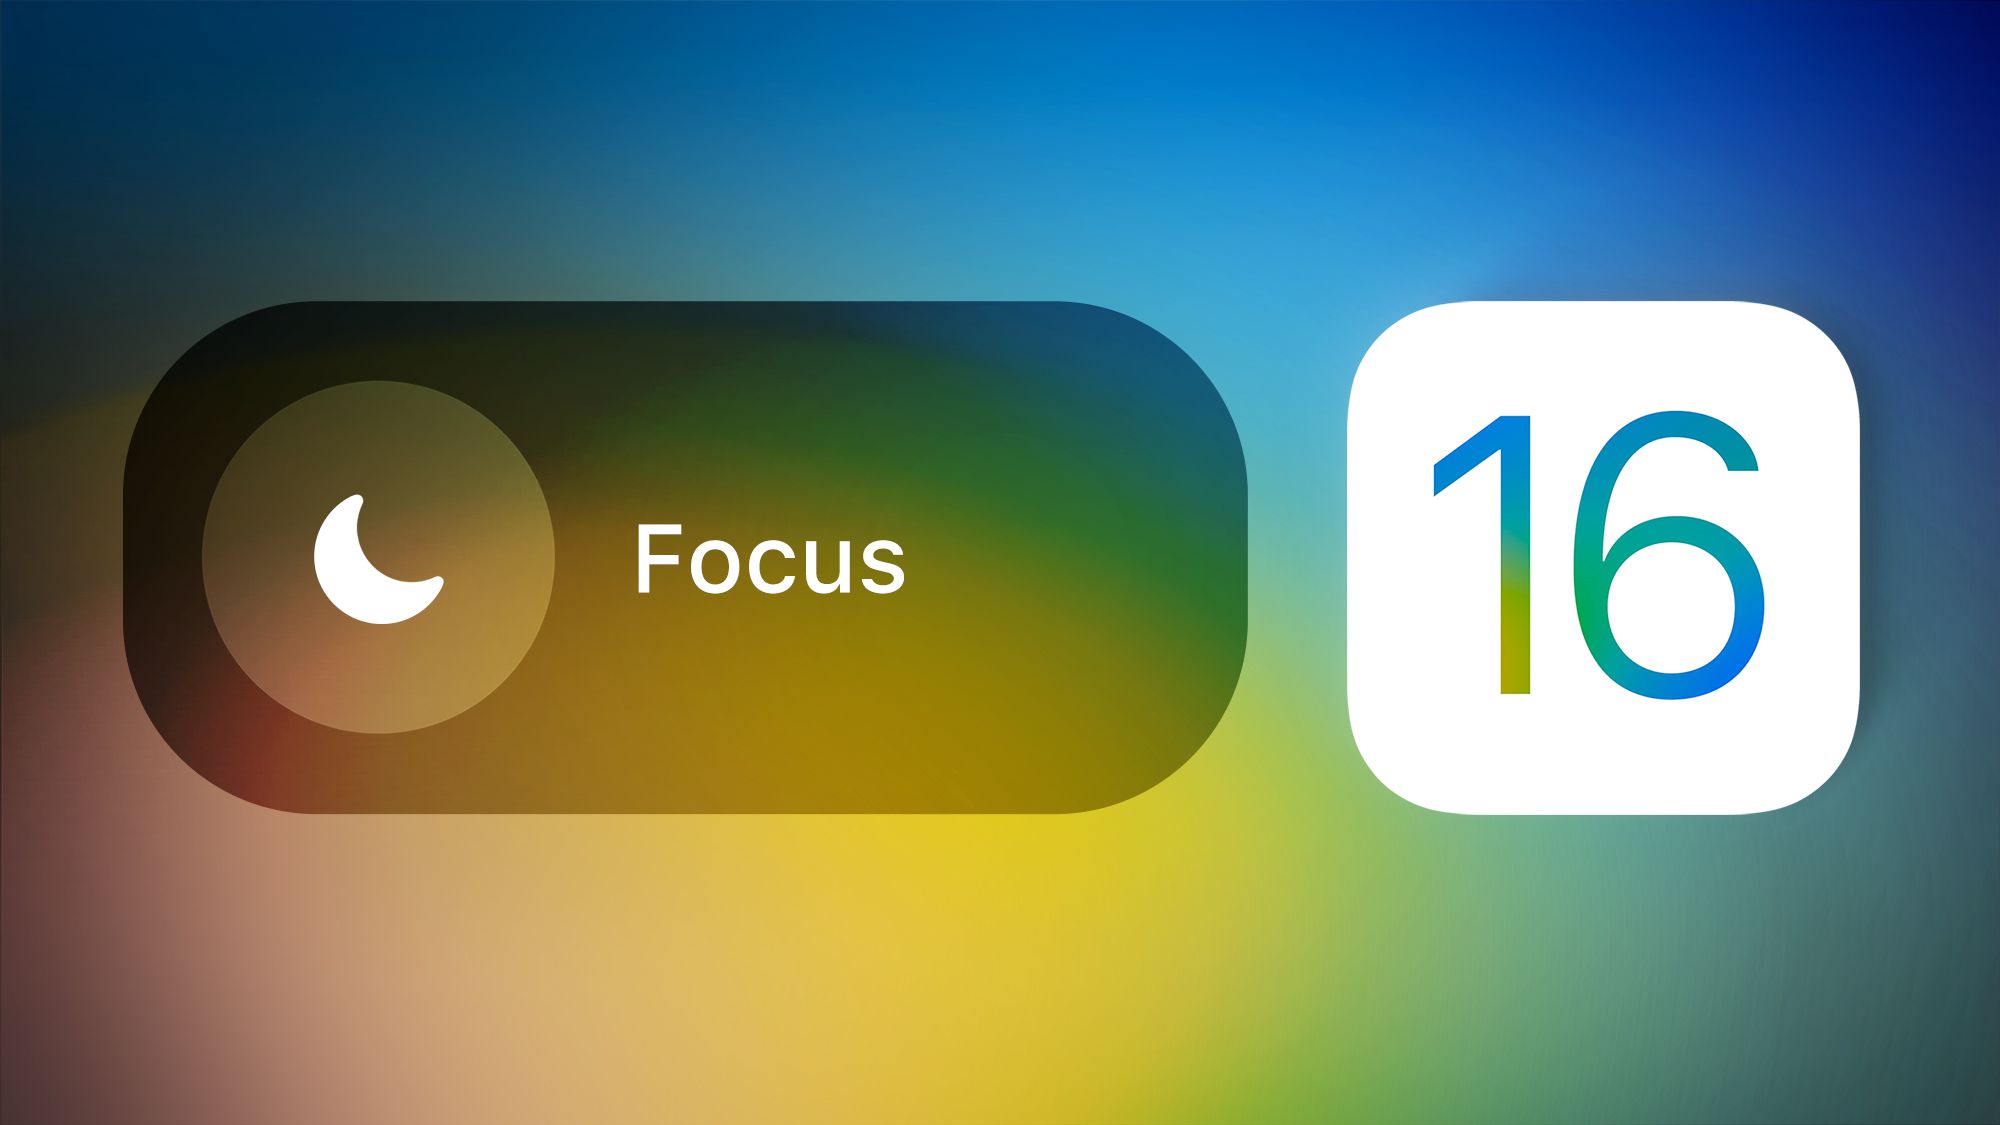 iOS 16 Focus Guide: What's New With Apple's Focus Mode